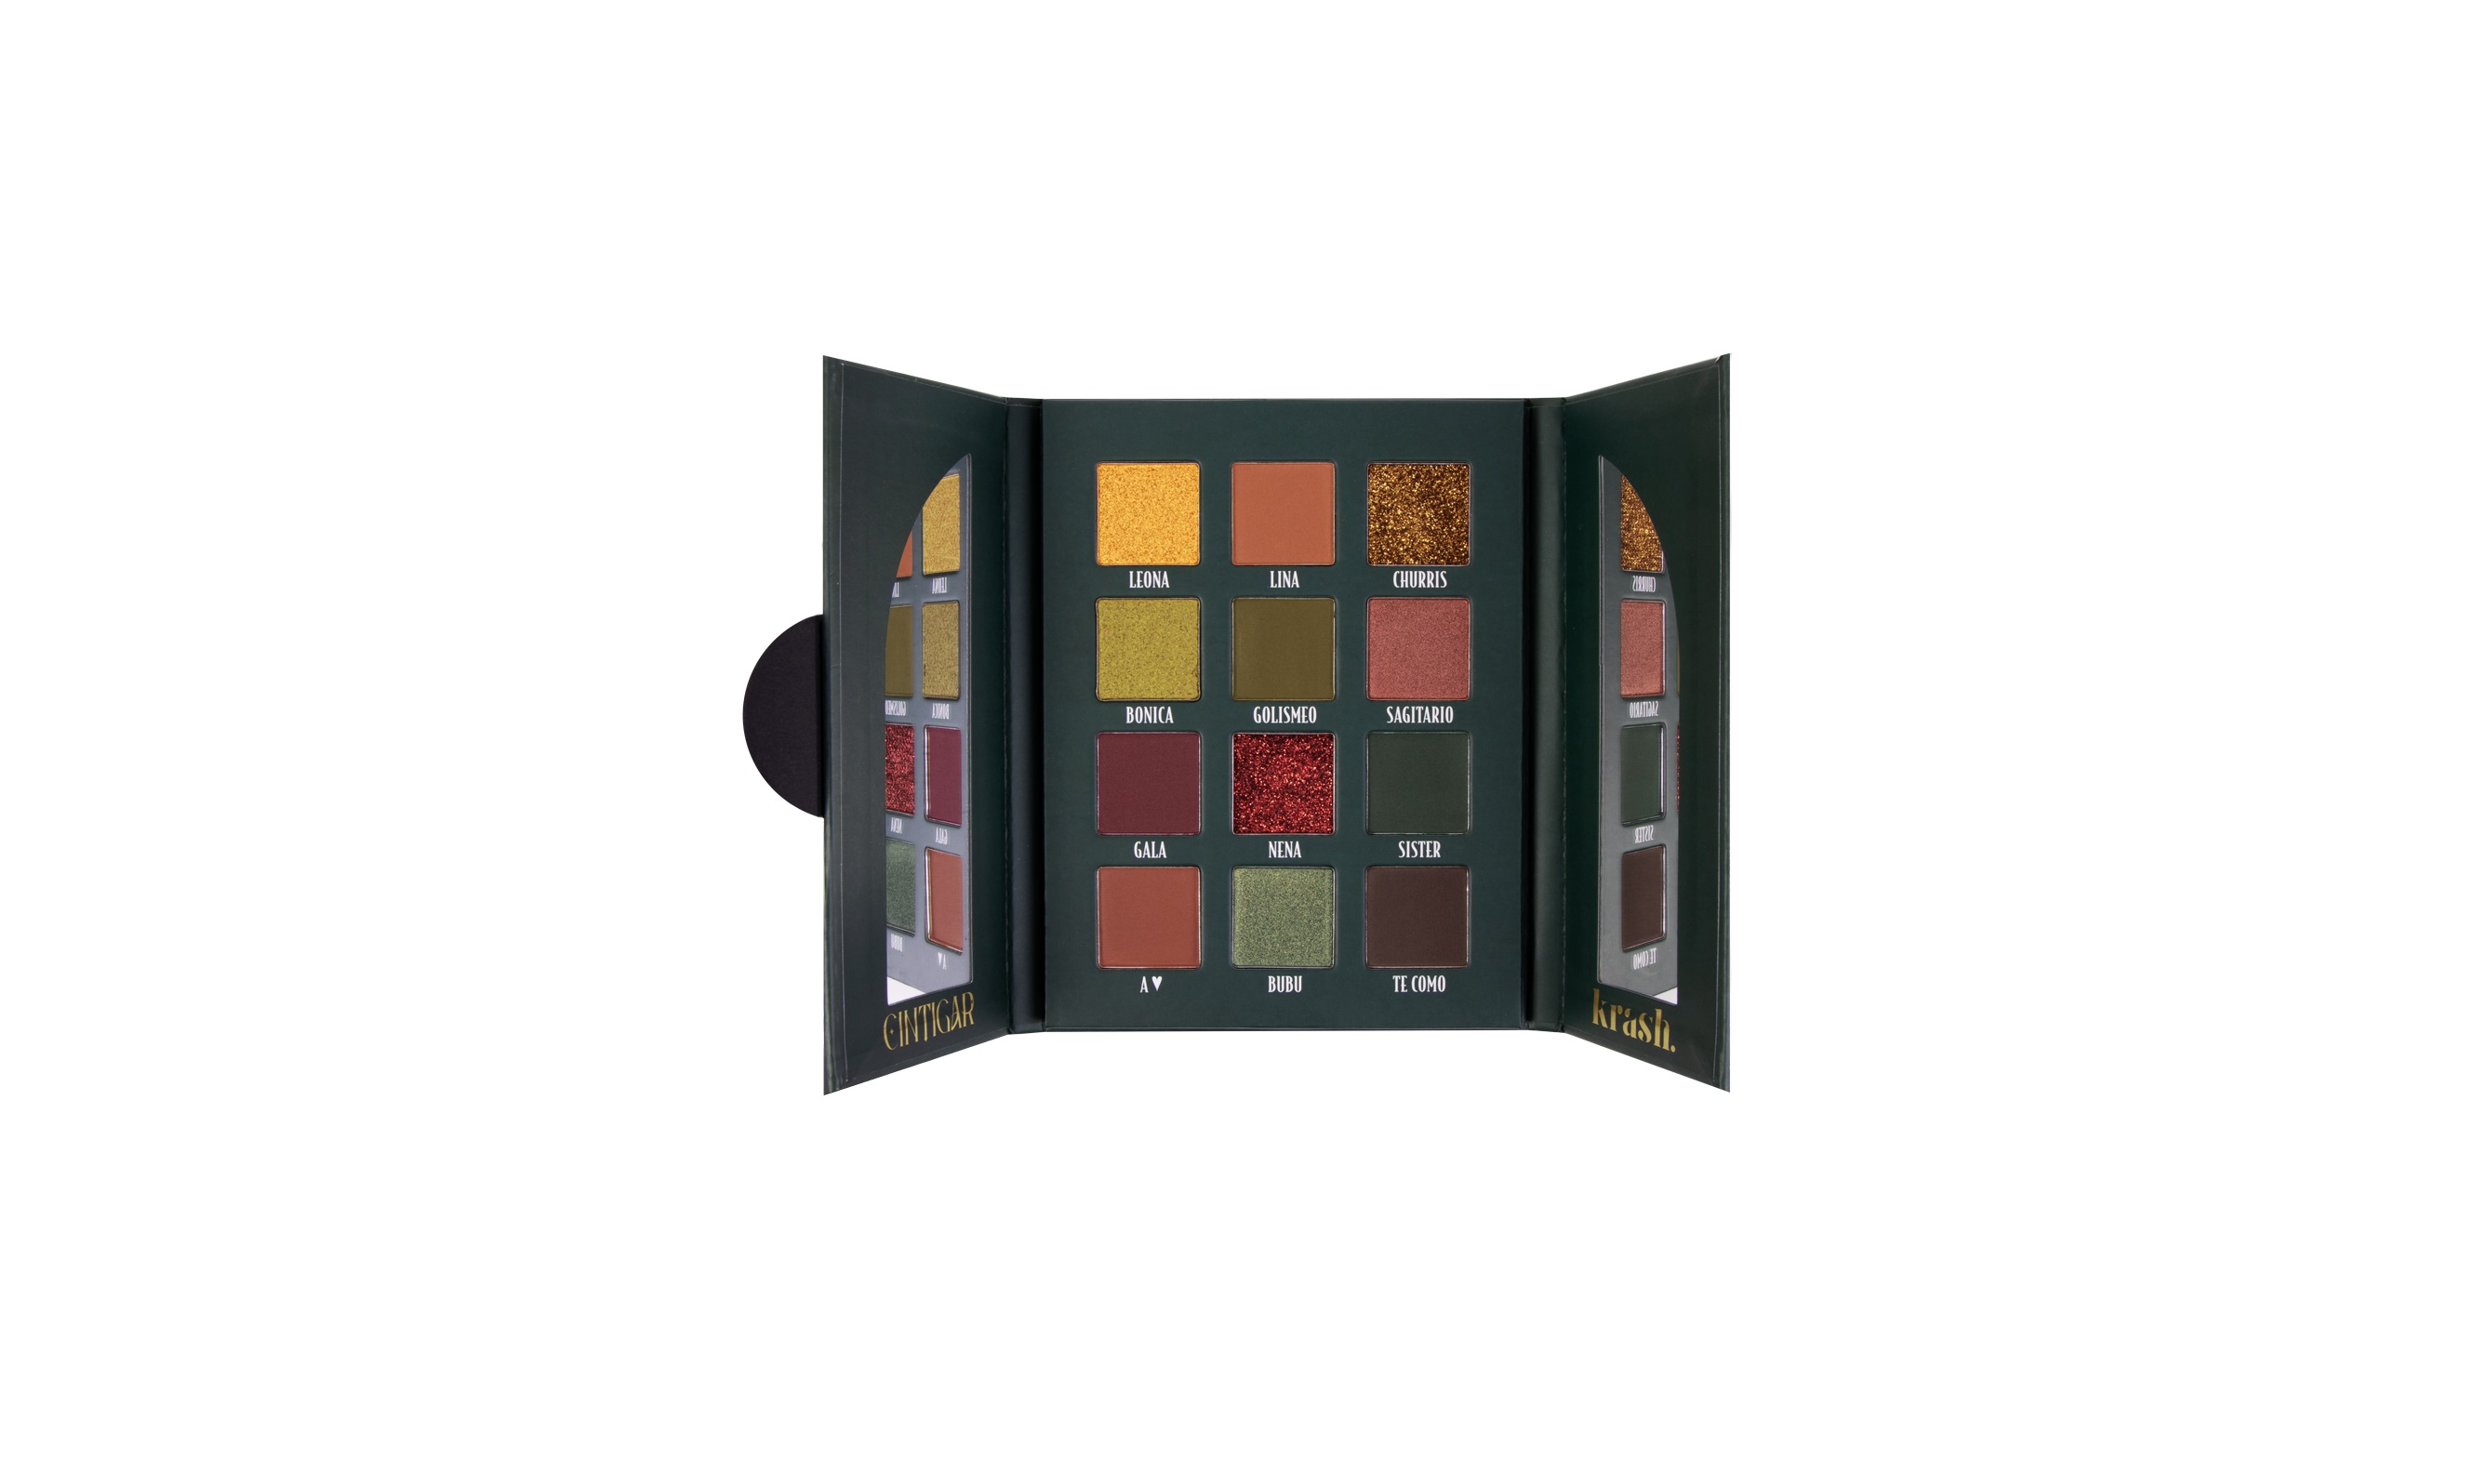 Twelve hyperpigmented shadows in warm and cold tones to create all kinds of makeup.